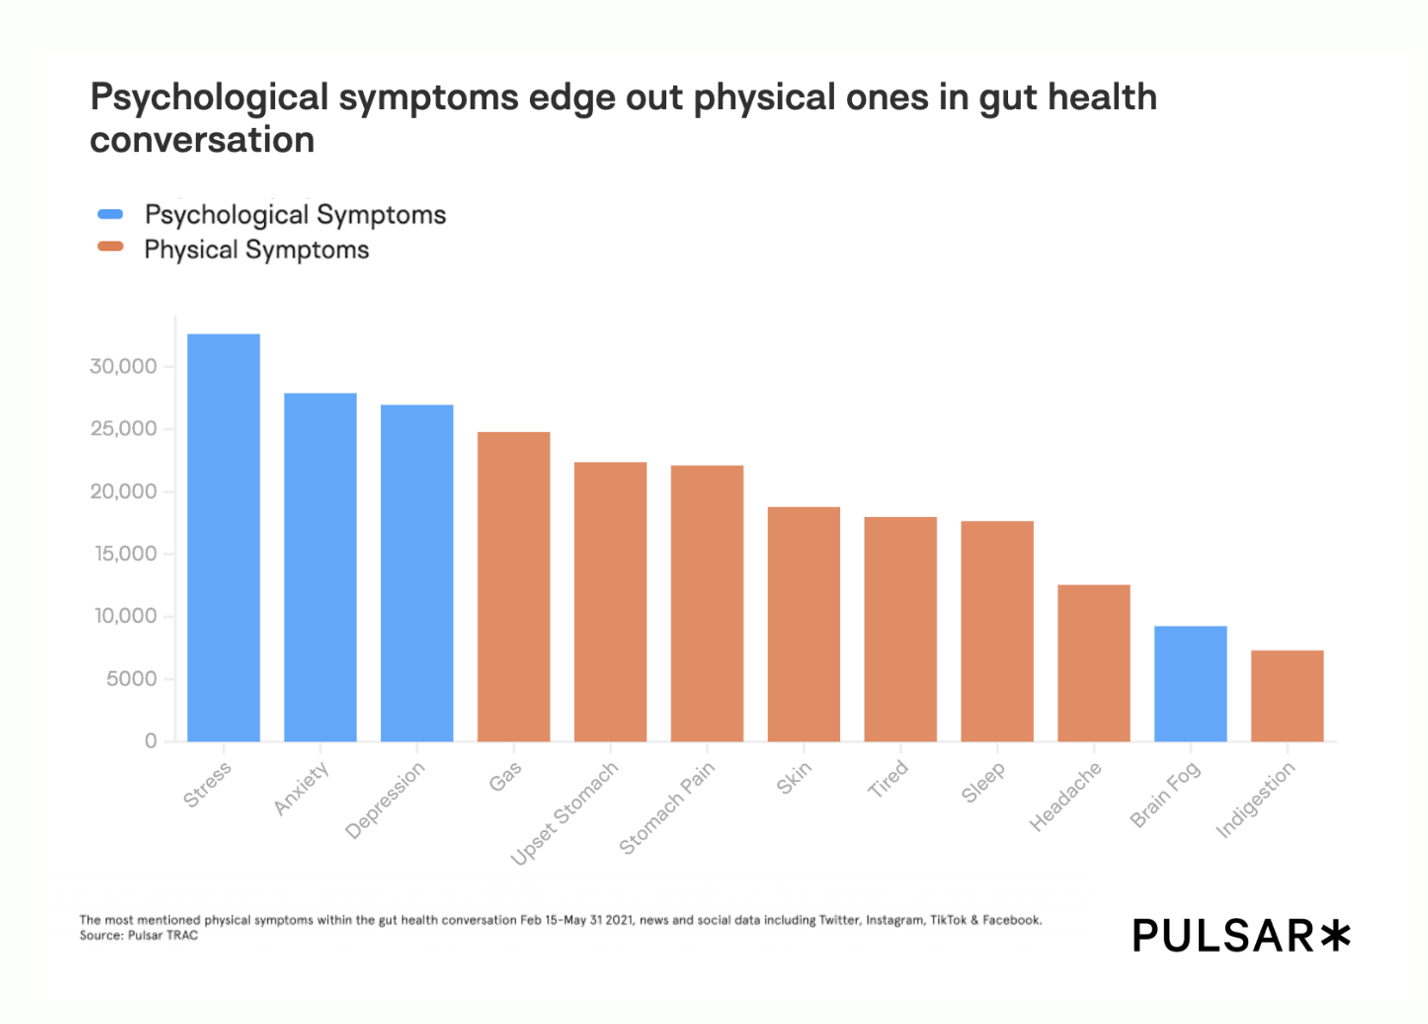 Psychological symptoms edge out physical ones in gut health conversation